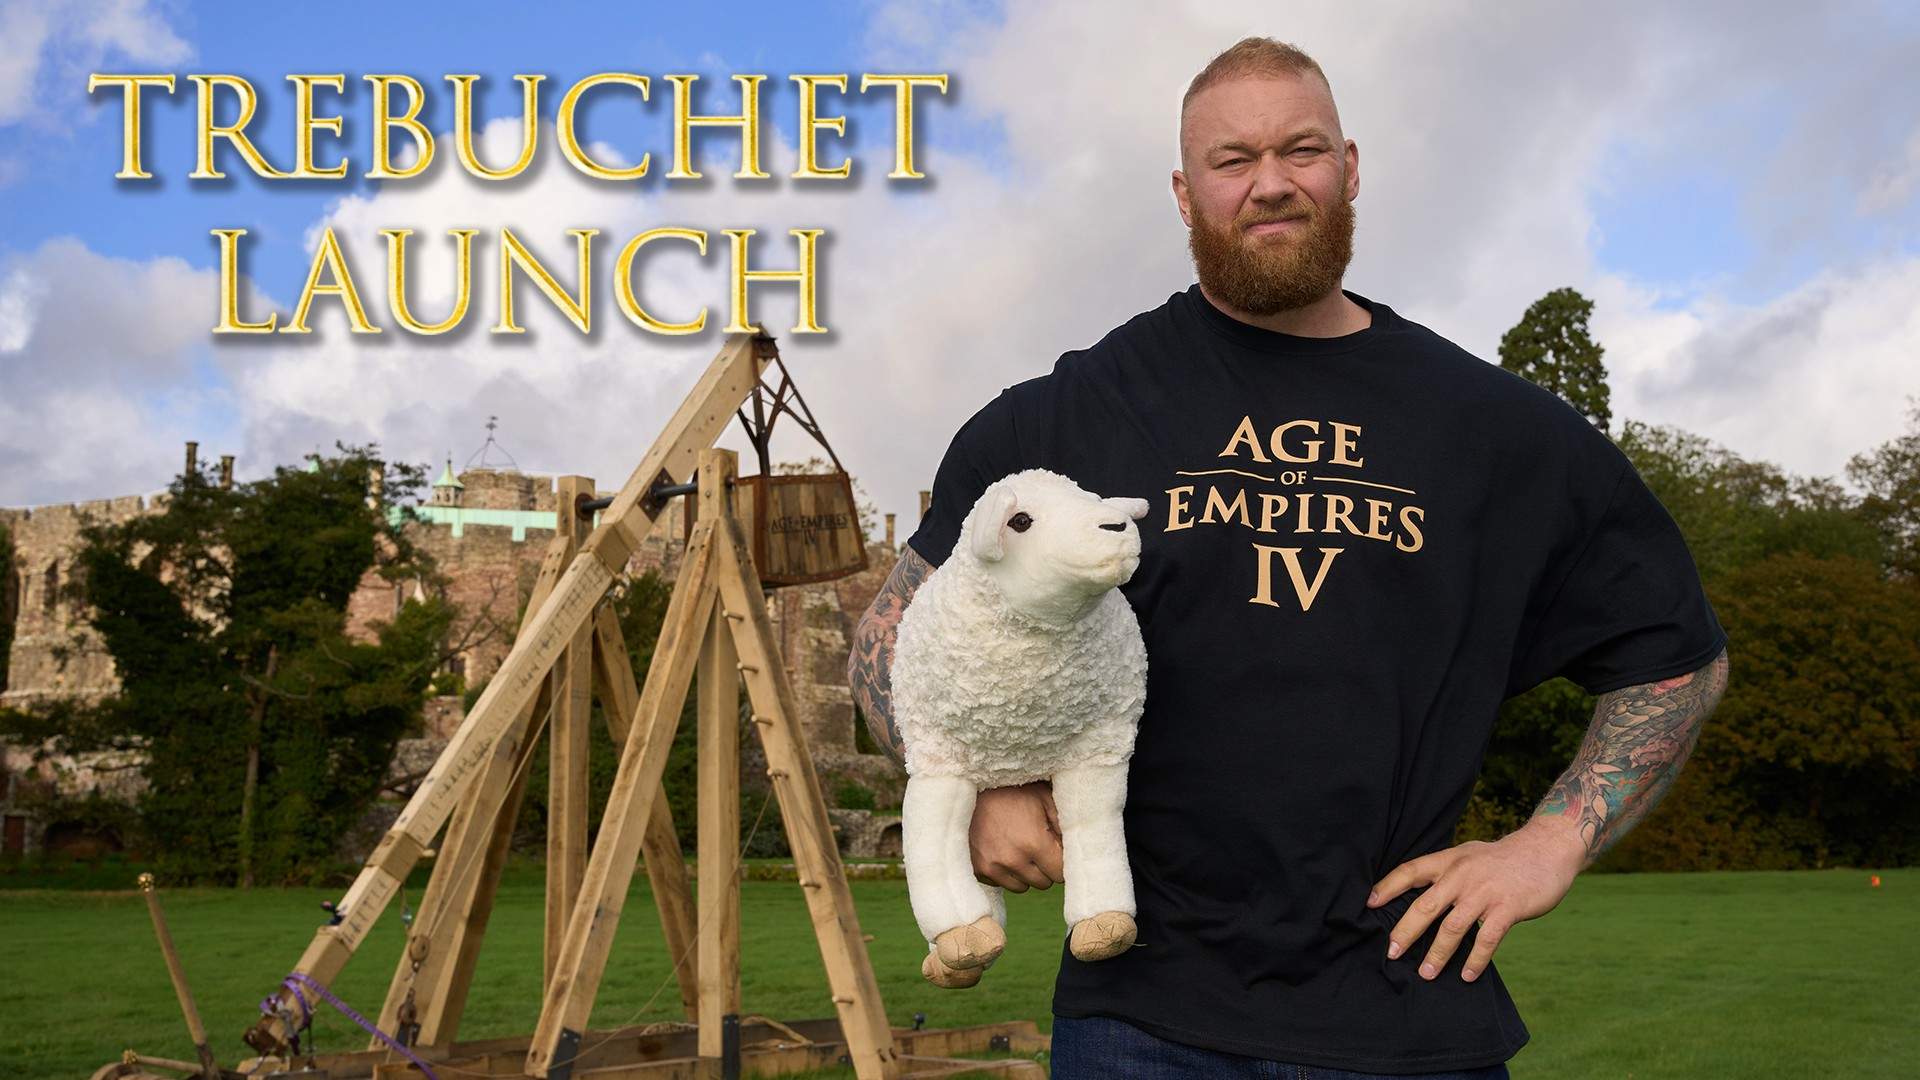 Video For Age of Empires IV: Trebuchets, Tips, and a Toweringly Tall Guest